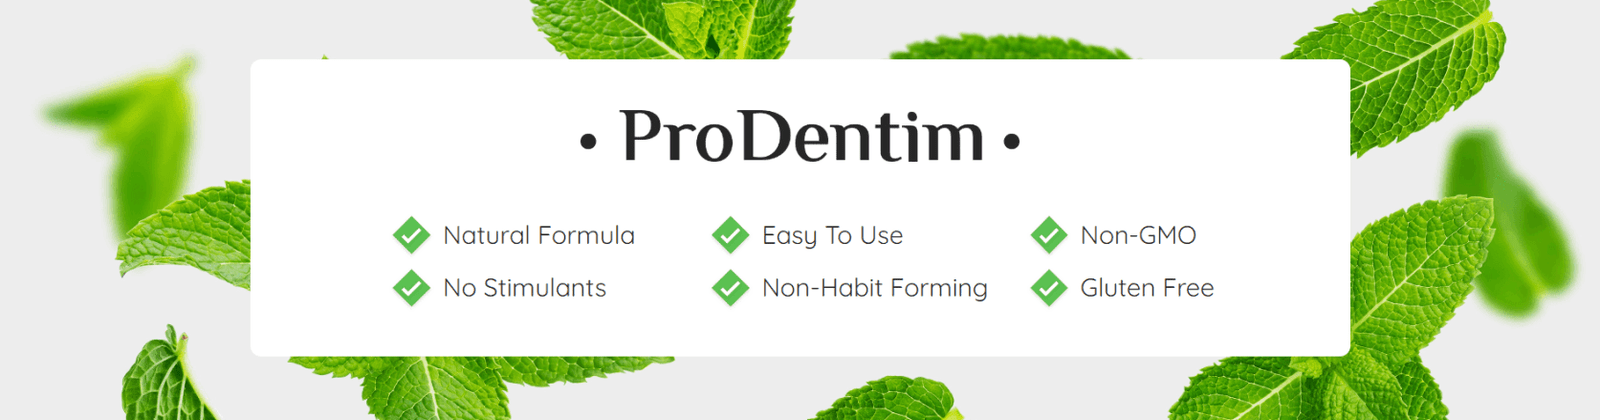 Prodentim easy to use